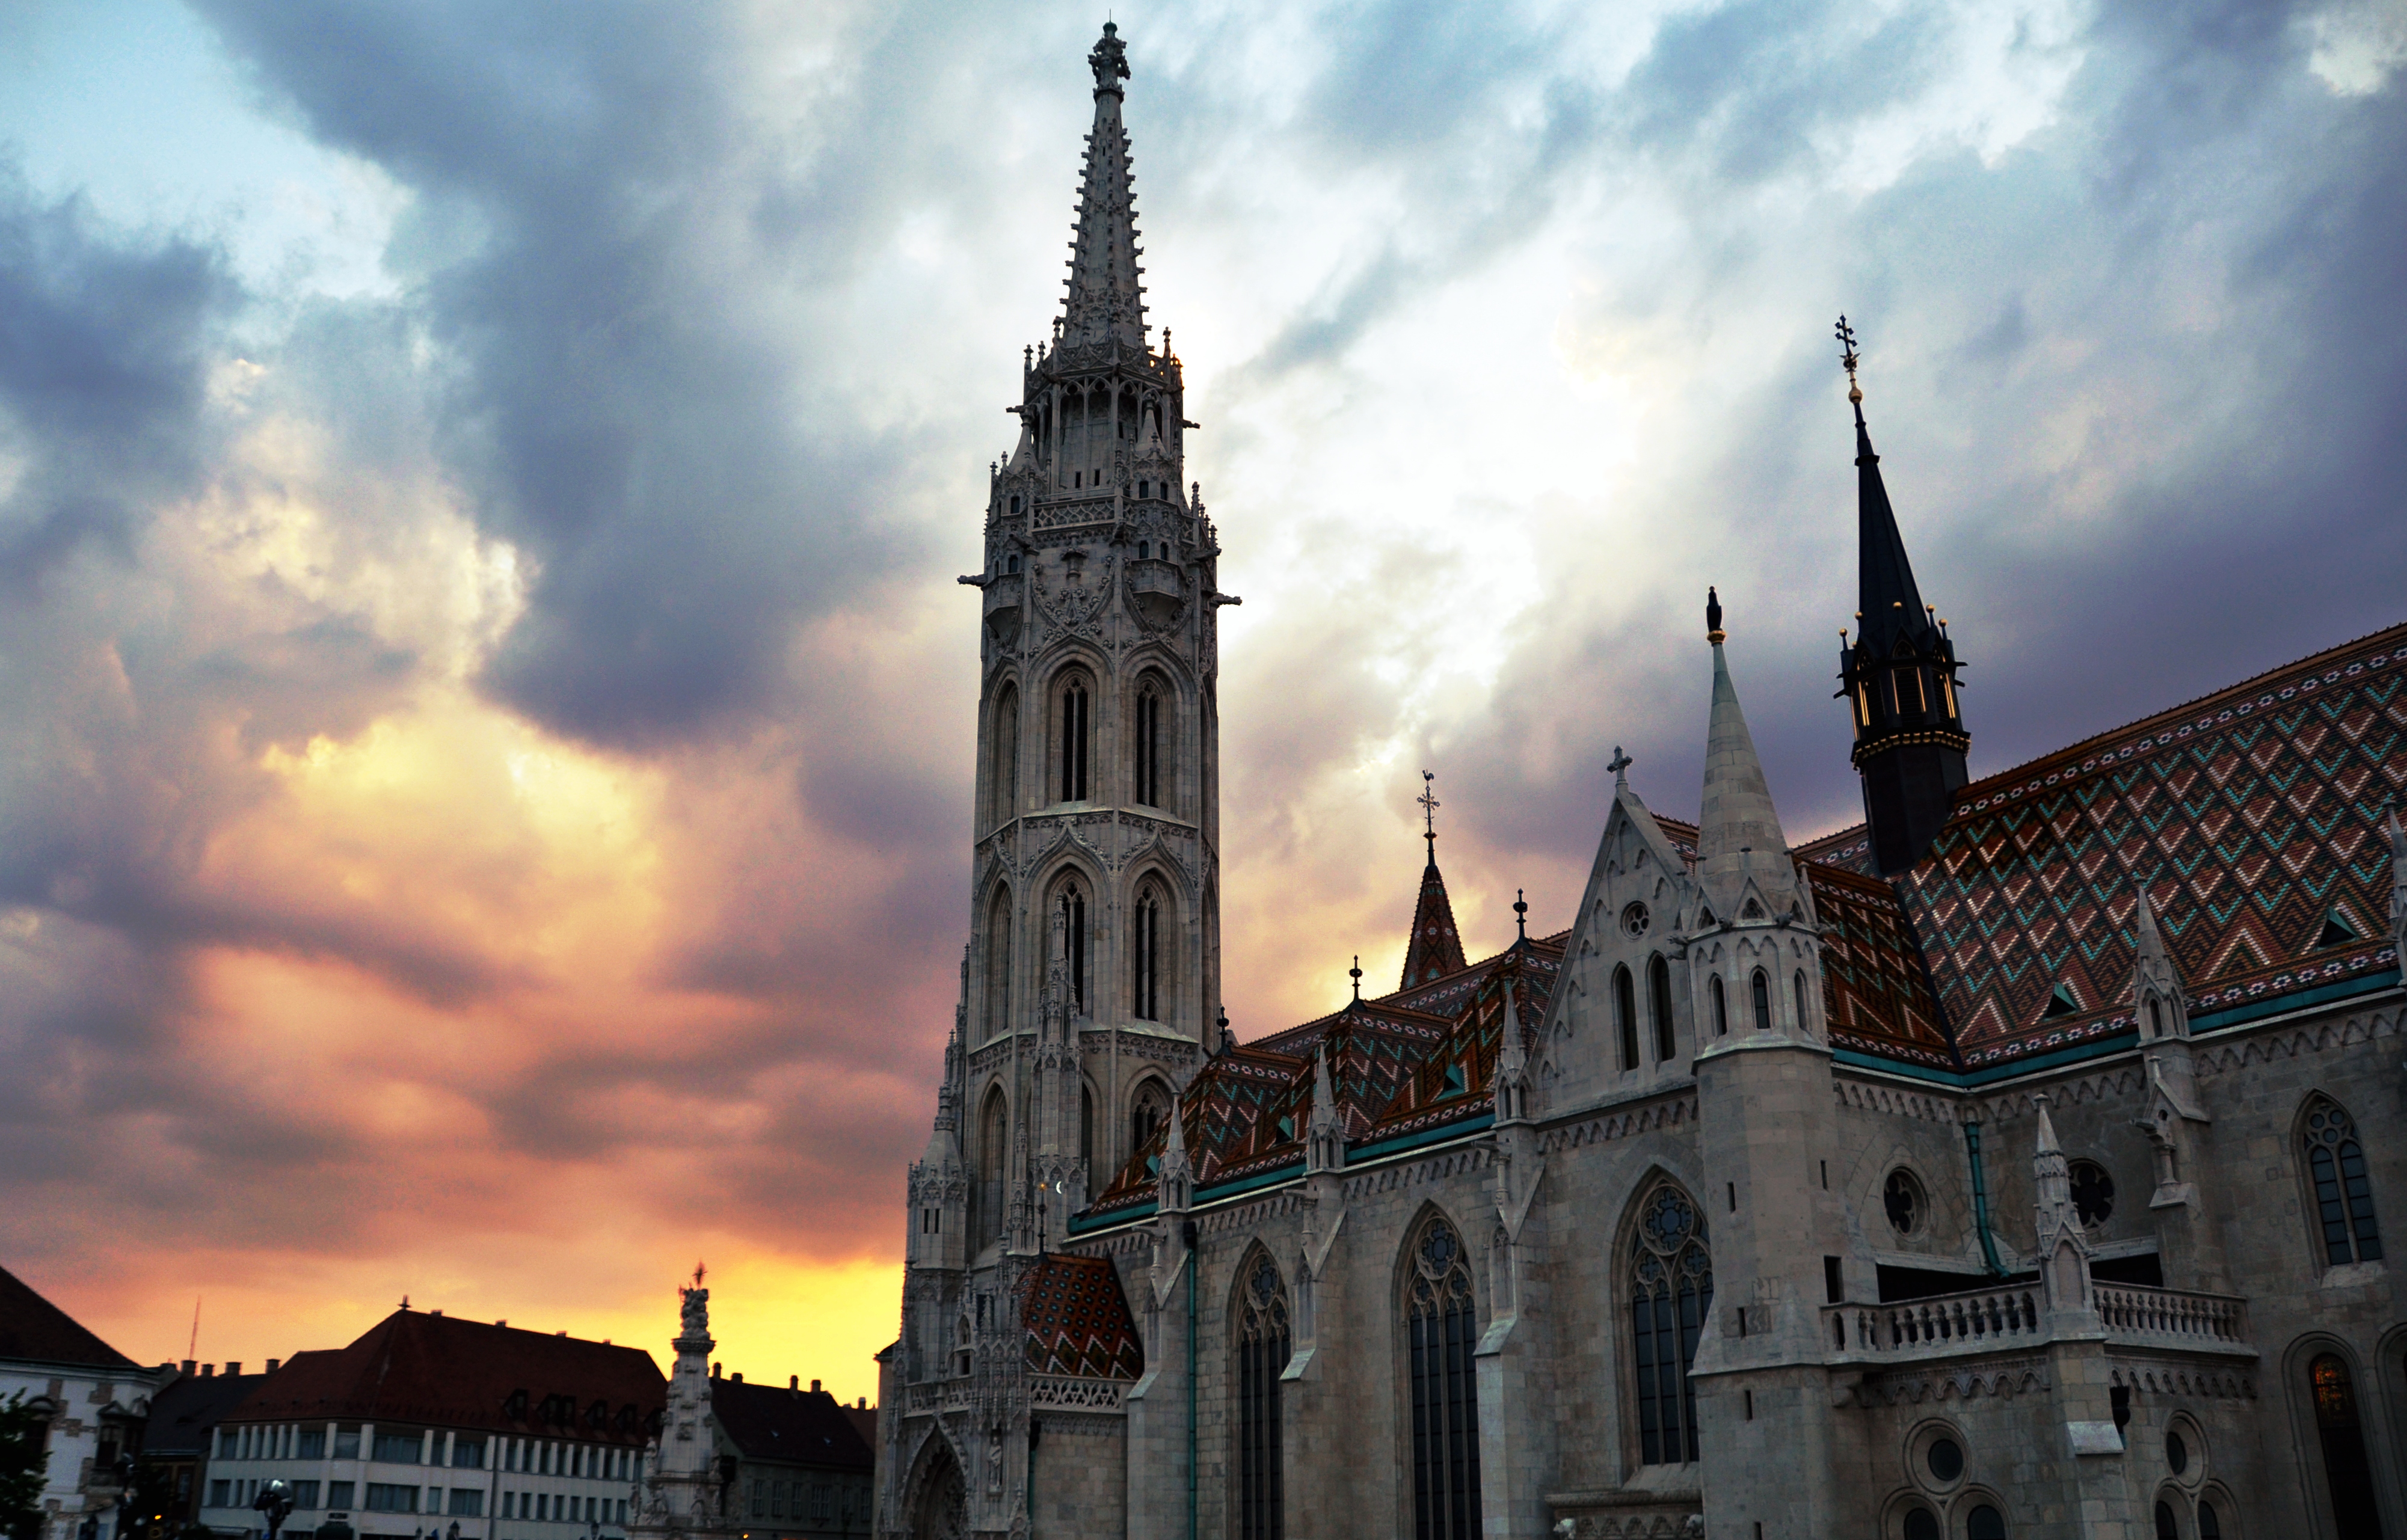 architecture, Old building, Budapest, Hungary, Sunset, Clouds, Tower, Historic, Ancient, Cathedral, Rooftops Wallpaper